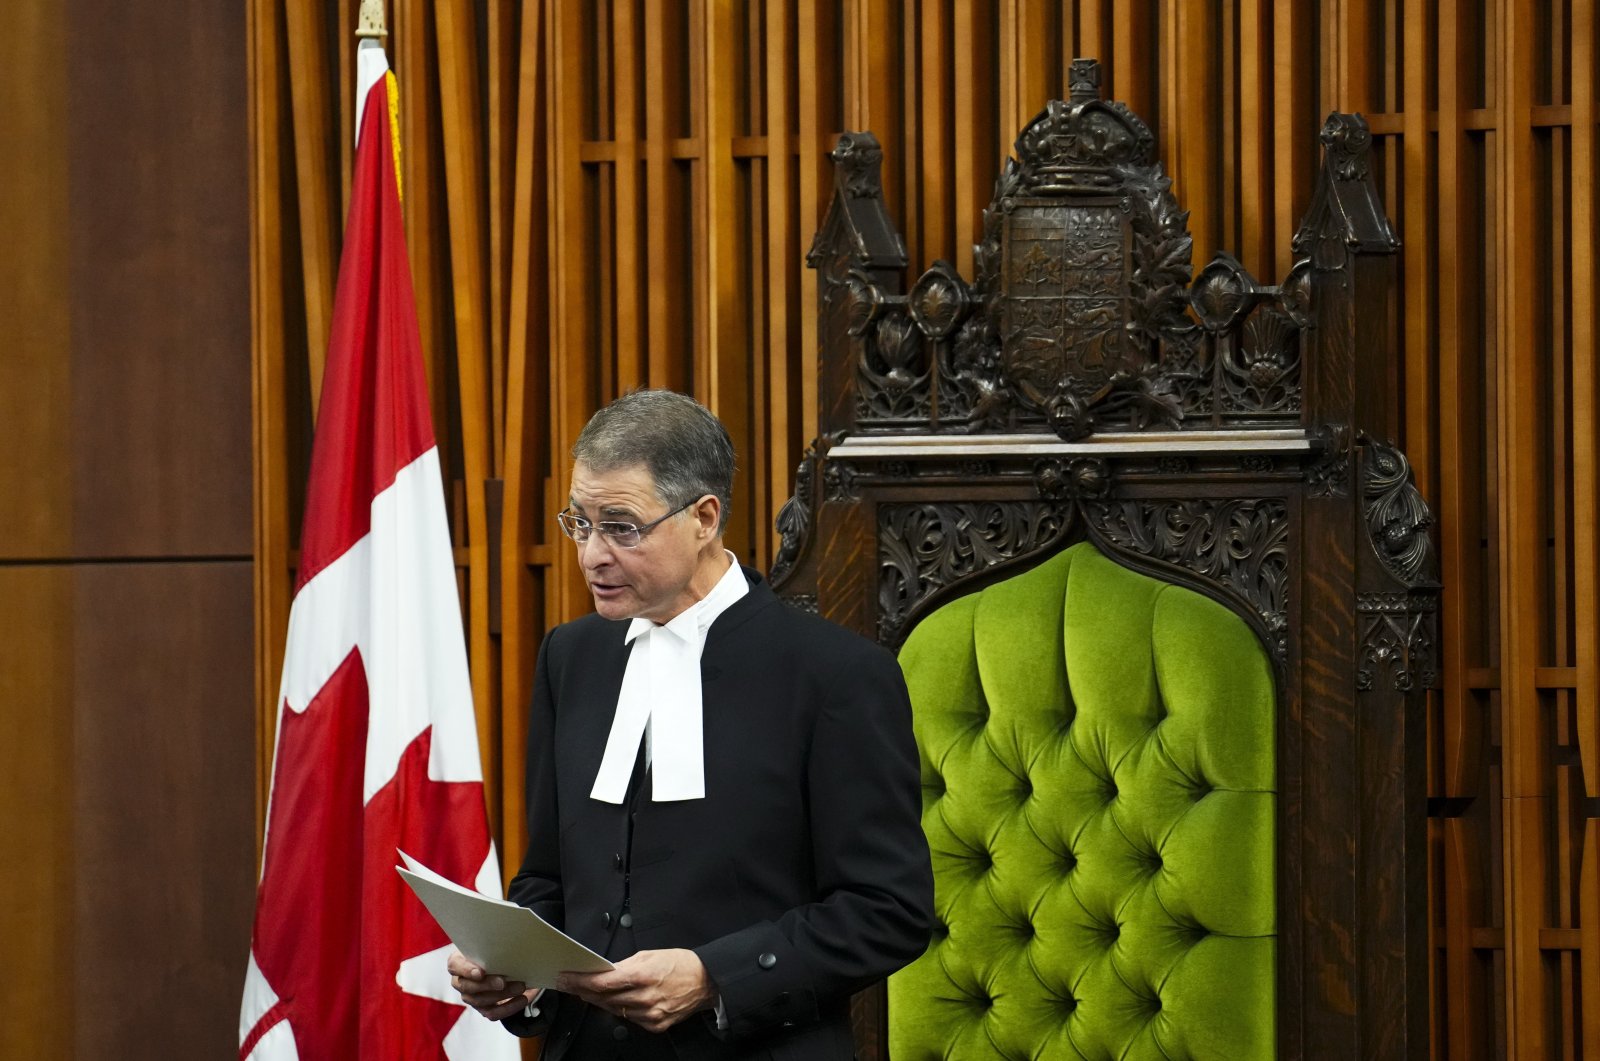 The Speaker of the House of Commons Anthony Rota delivers a speech following an address by Ukrainian President Volodymyr Zelenskyy in the House of Commons on Parliament Hill in Ottawa on Friday, Sept. 22, 2023. (AP Photo)